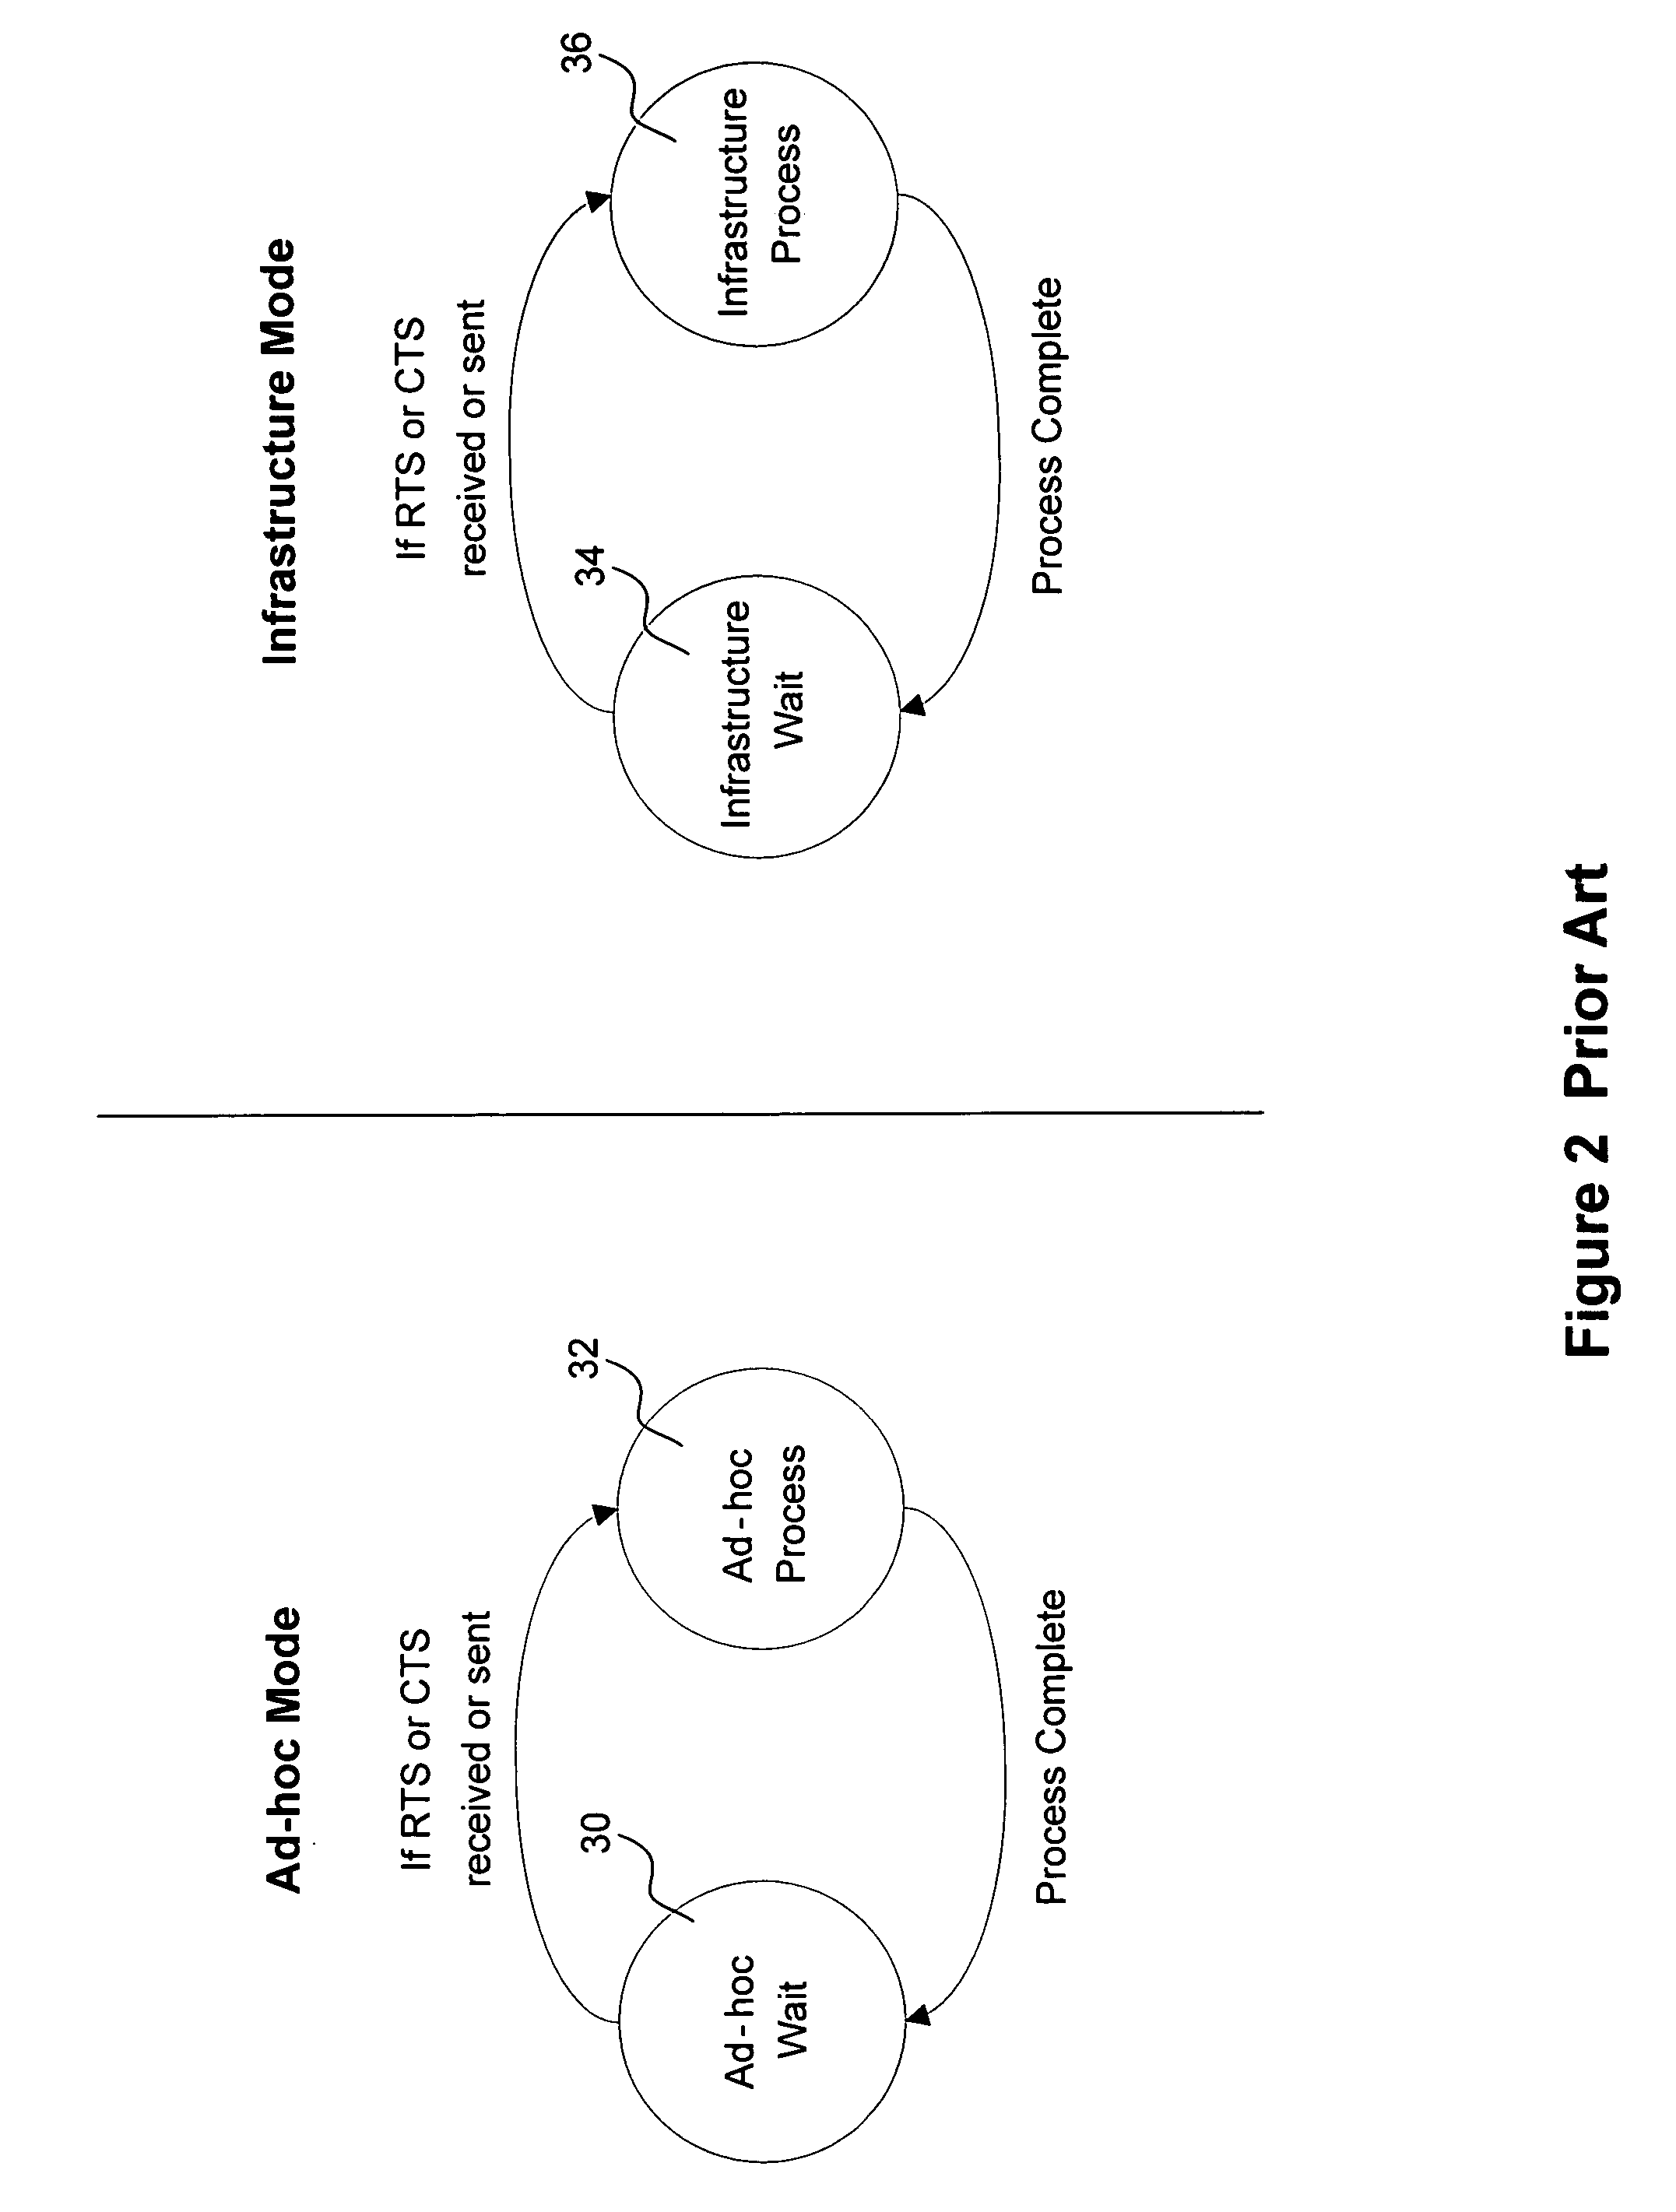 Wireless state machine and multiplexing method for concurrent ad-hoc and infrastructure mode service in wireless networking